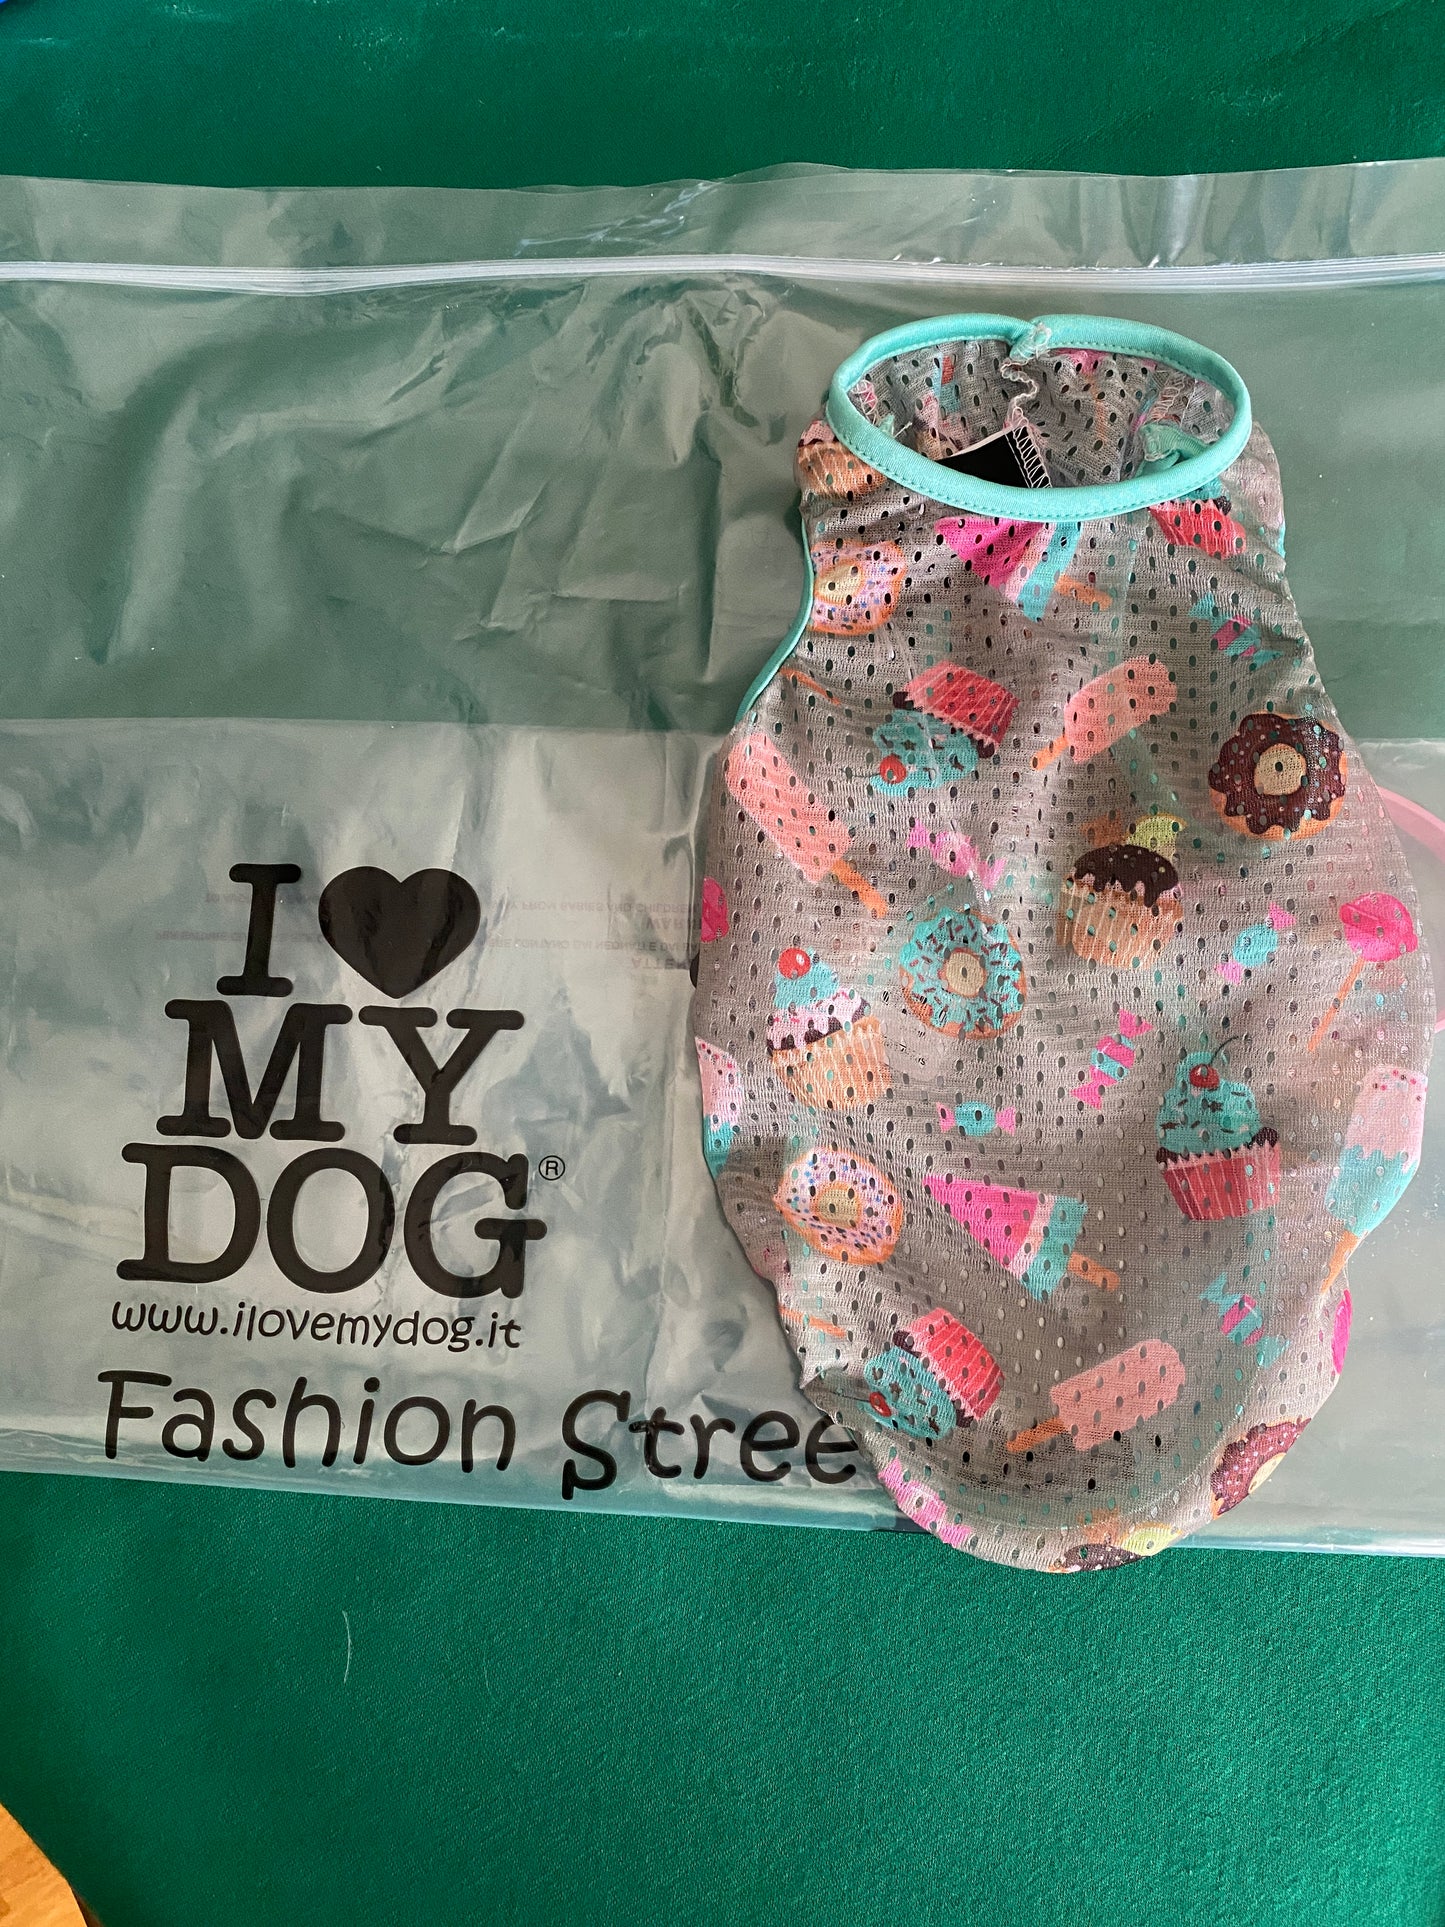 SPARKLING ALL OVER MESH SHIRT - I LOVE MY DOG - SUN PROTECTION TANK